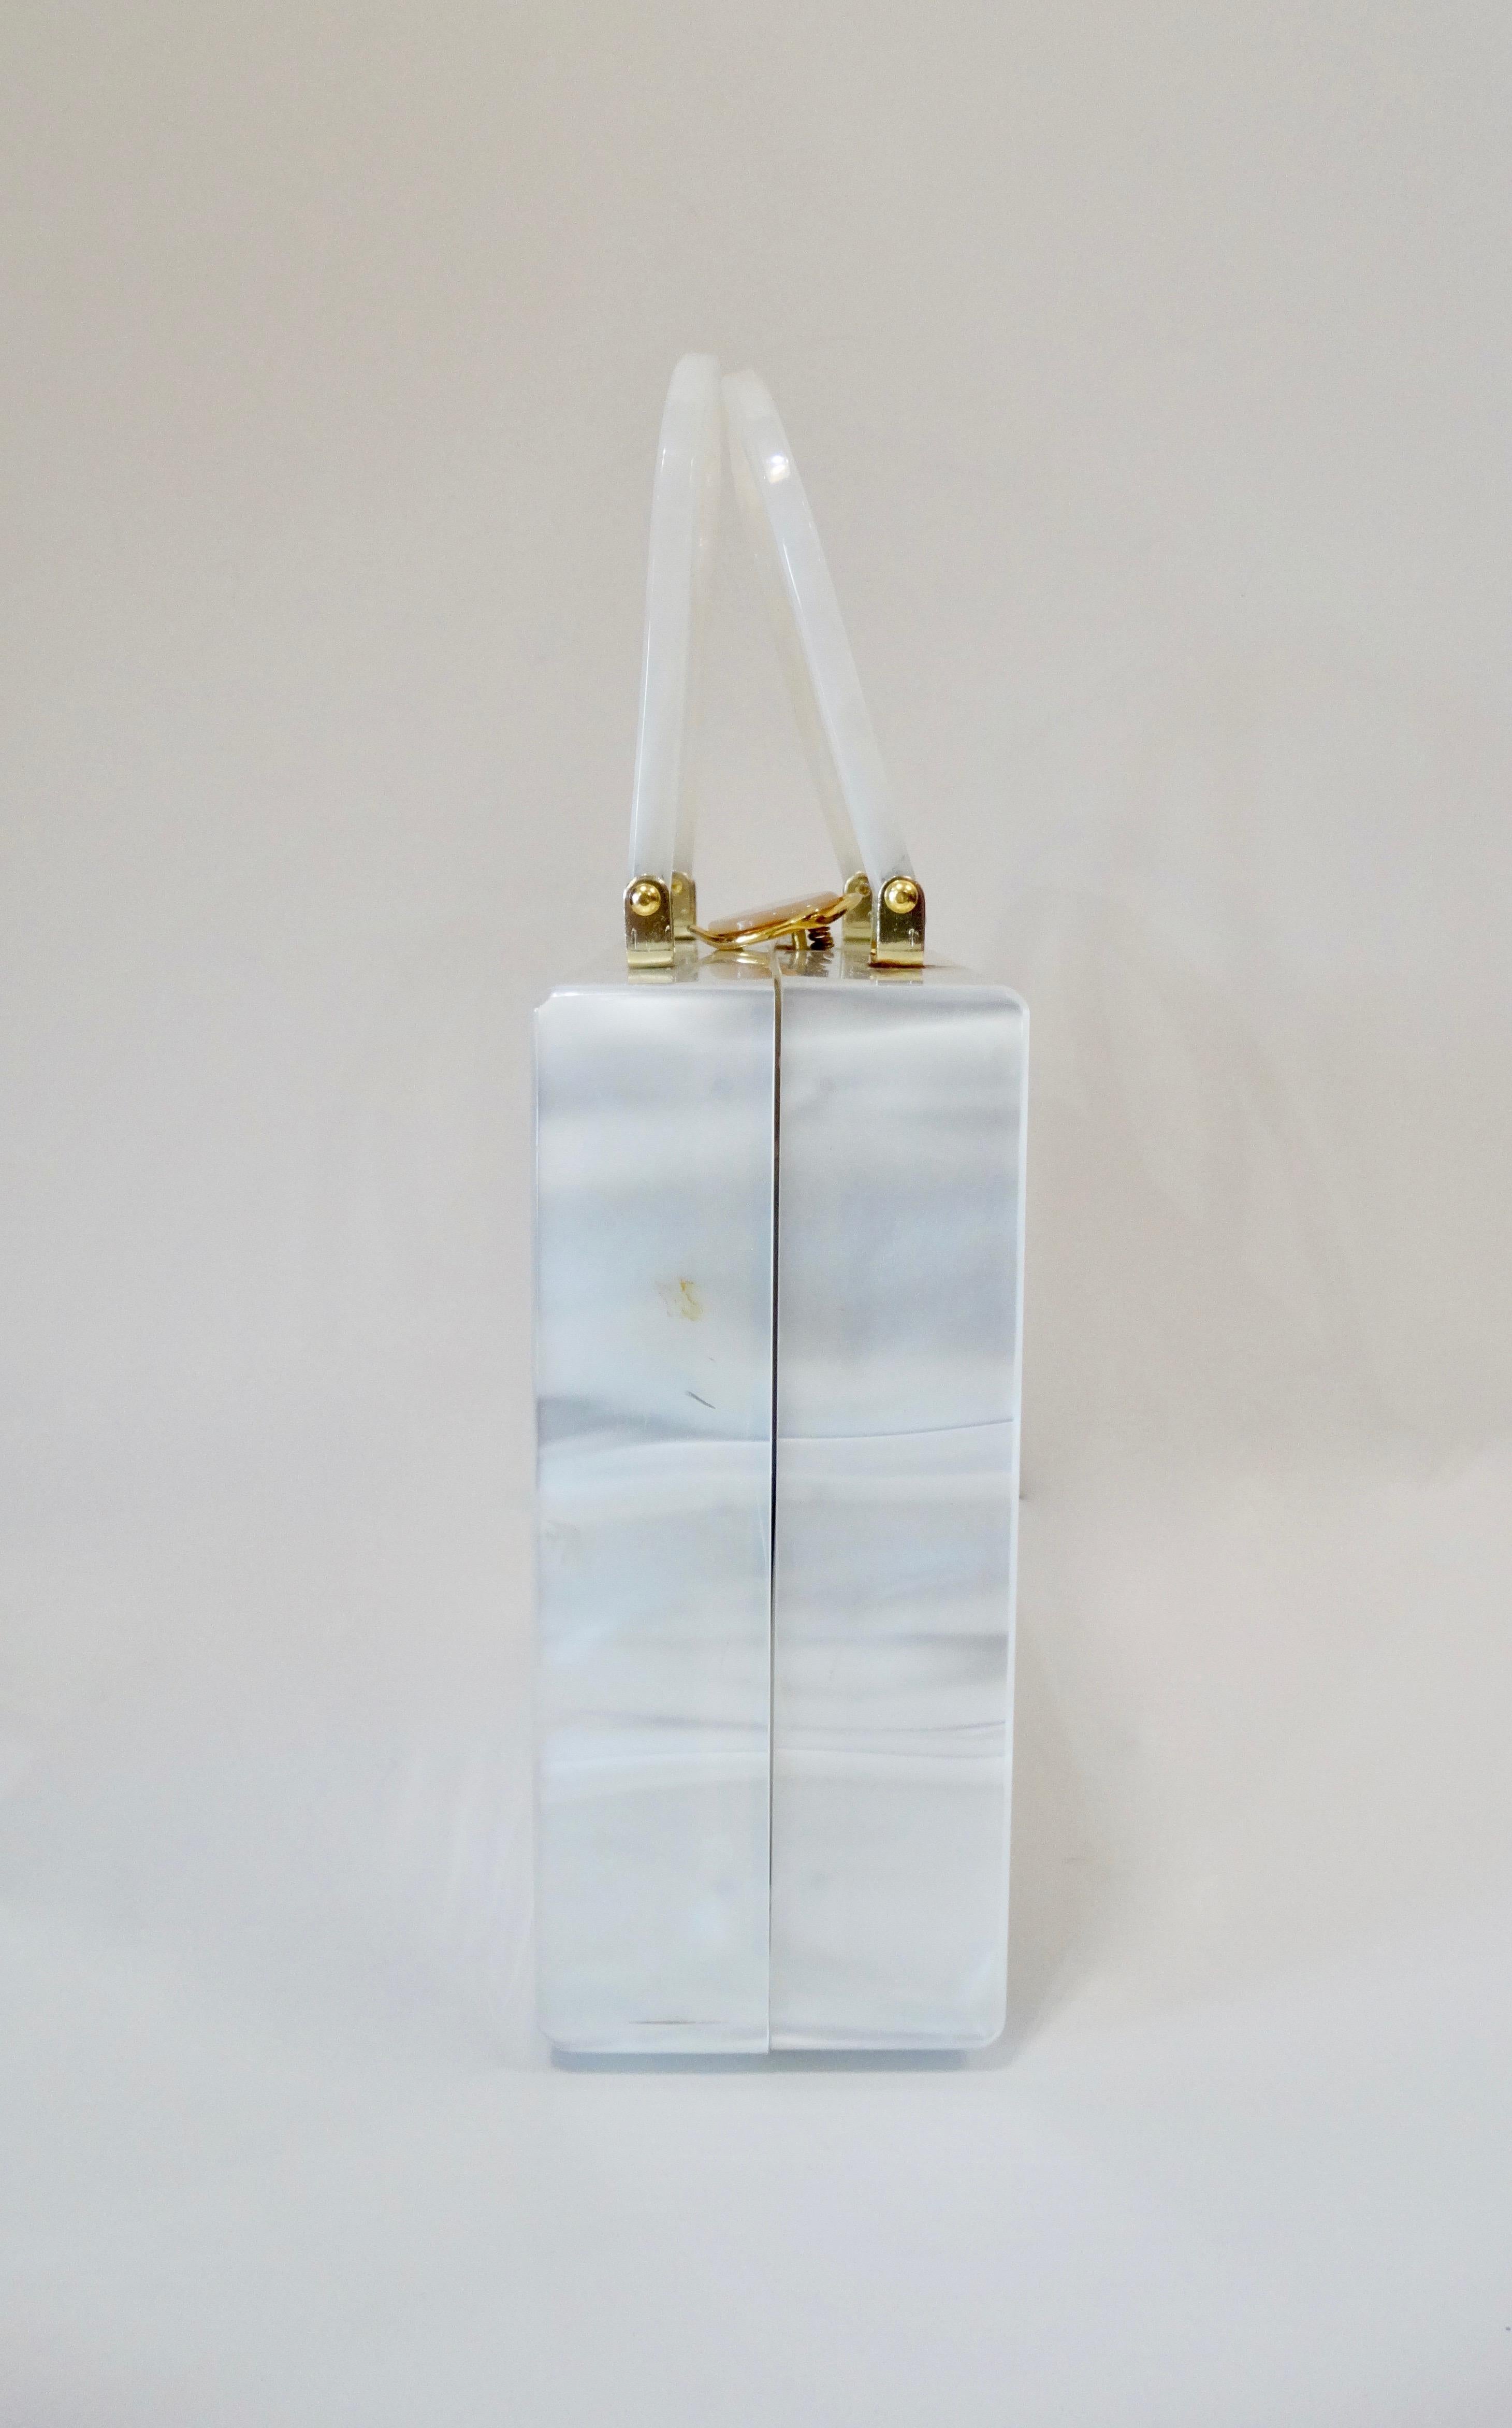 Carry around a piece of the 50's with you with this amazing box bag! Made by Stylecraft Miami, an innovative bag company that produced bags in a variety of styles and materials, this bag is a narrow box shape and is made of pearly white Lucite.